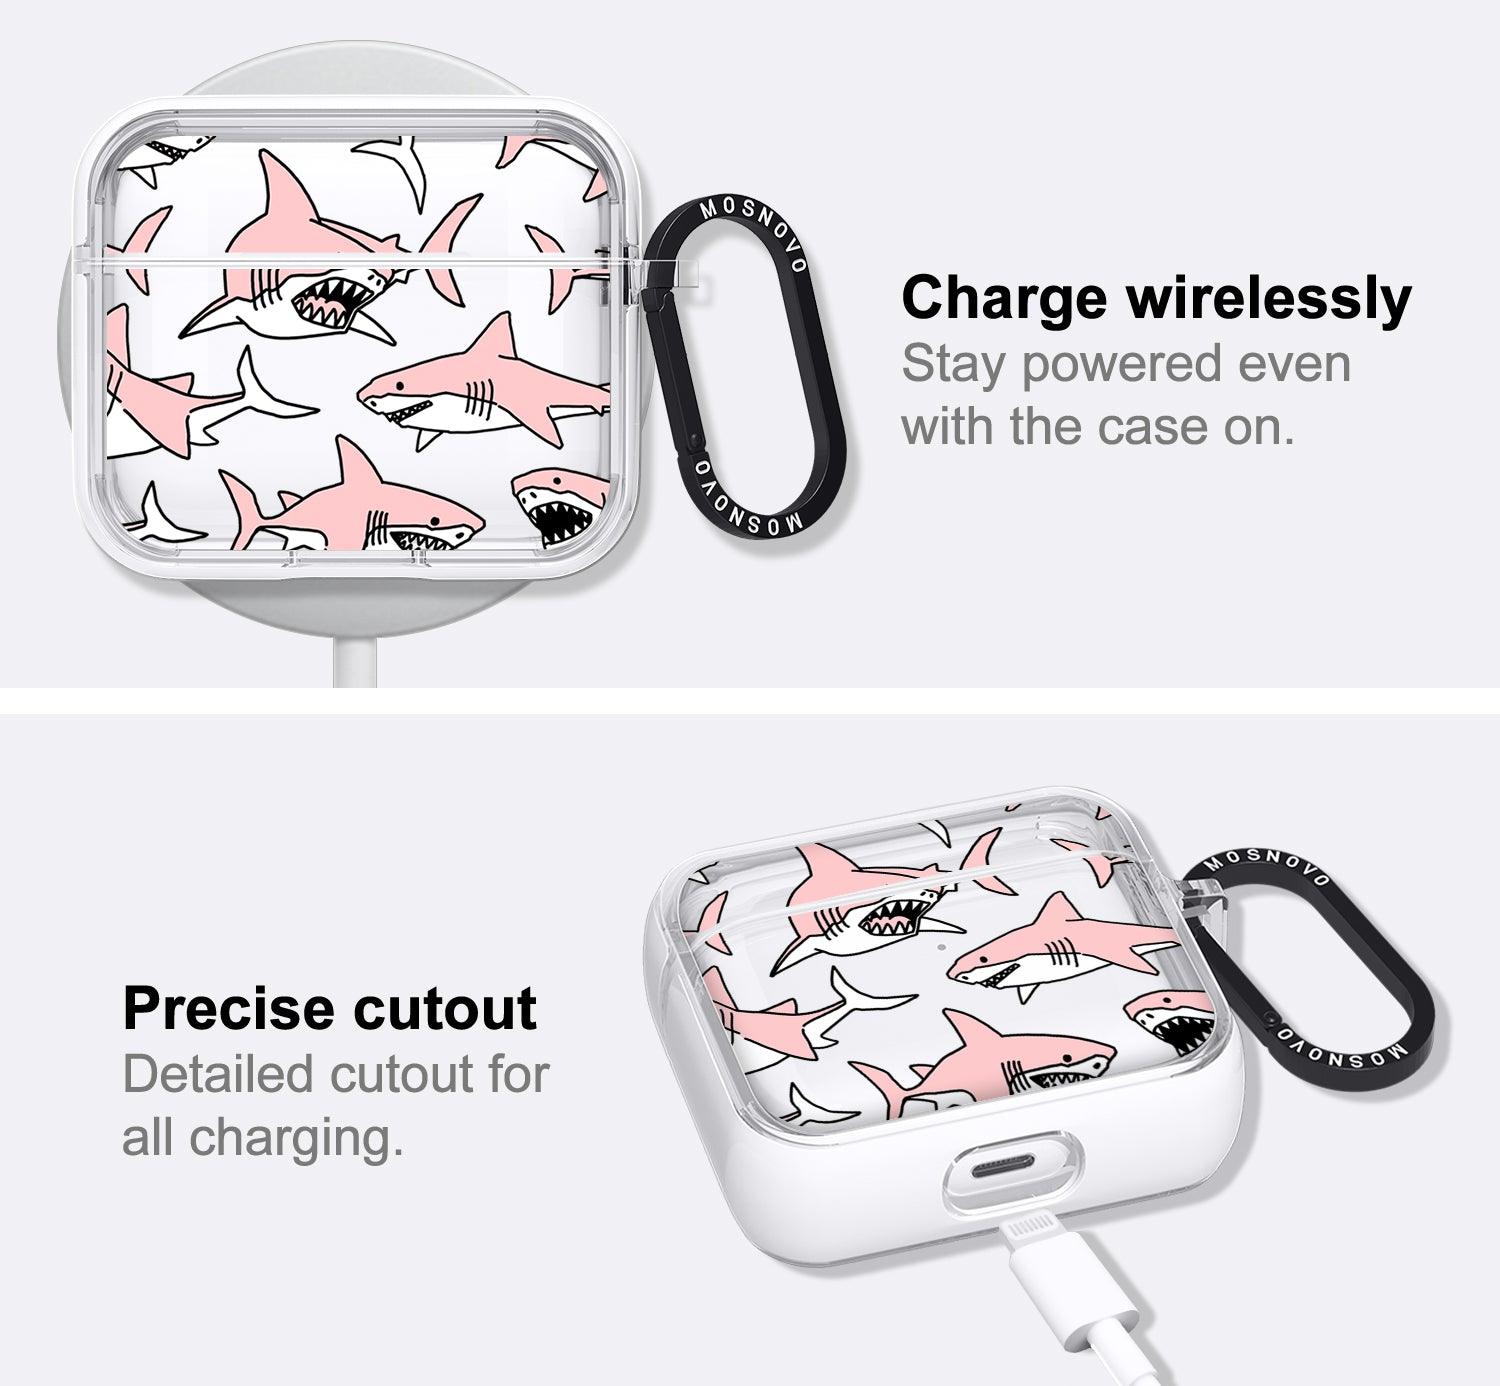 Pink Shark AirPods 3 Case (3rd Generation) - MOSNOVO